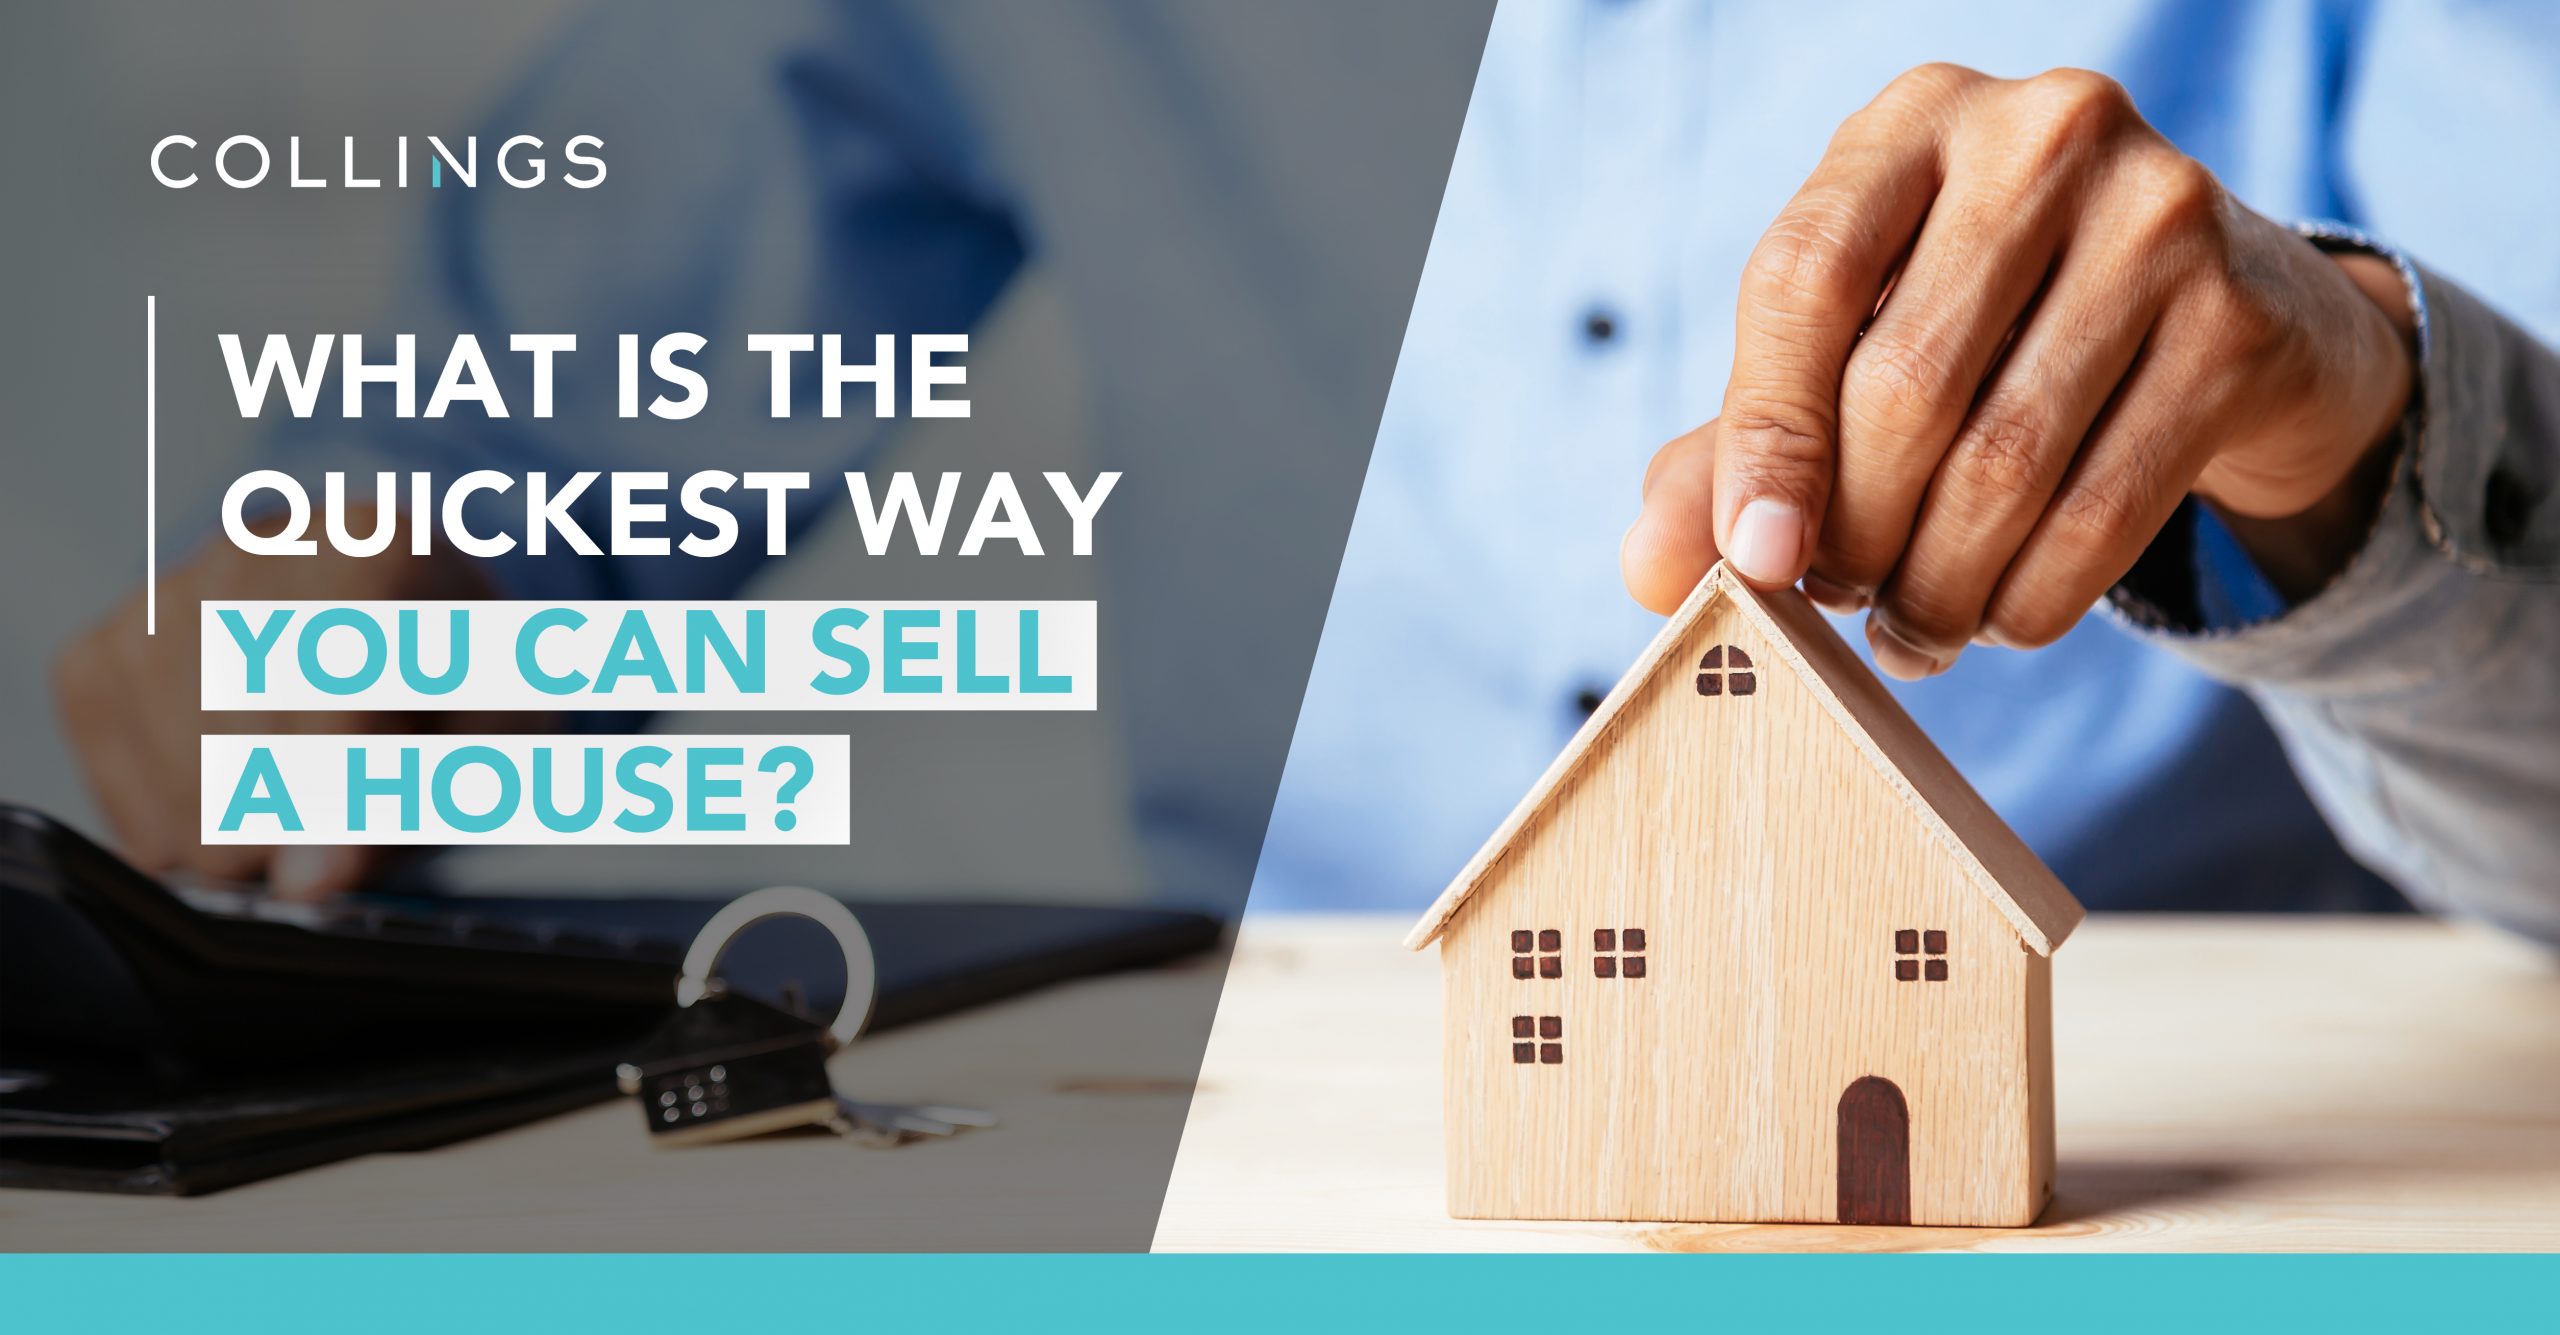 What Is The Quickest Way You Can Sell a House?